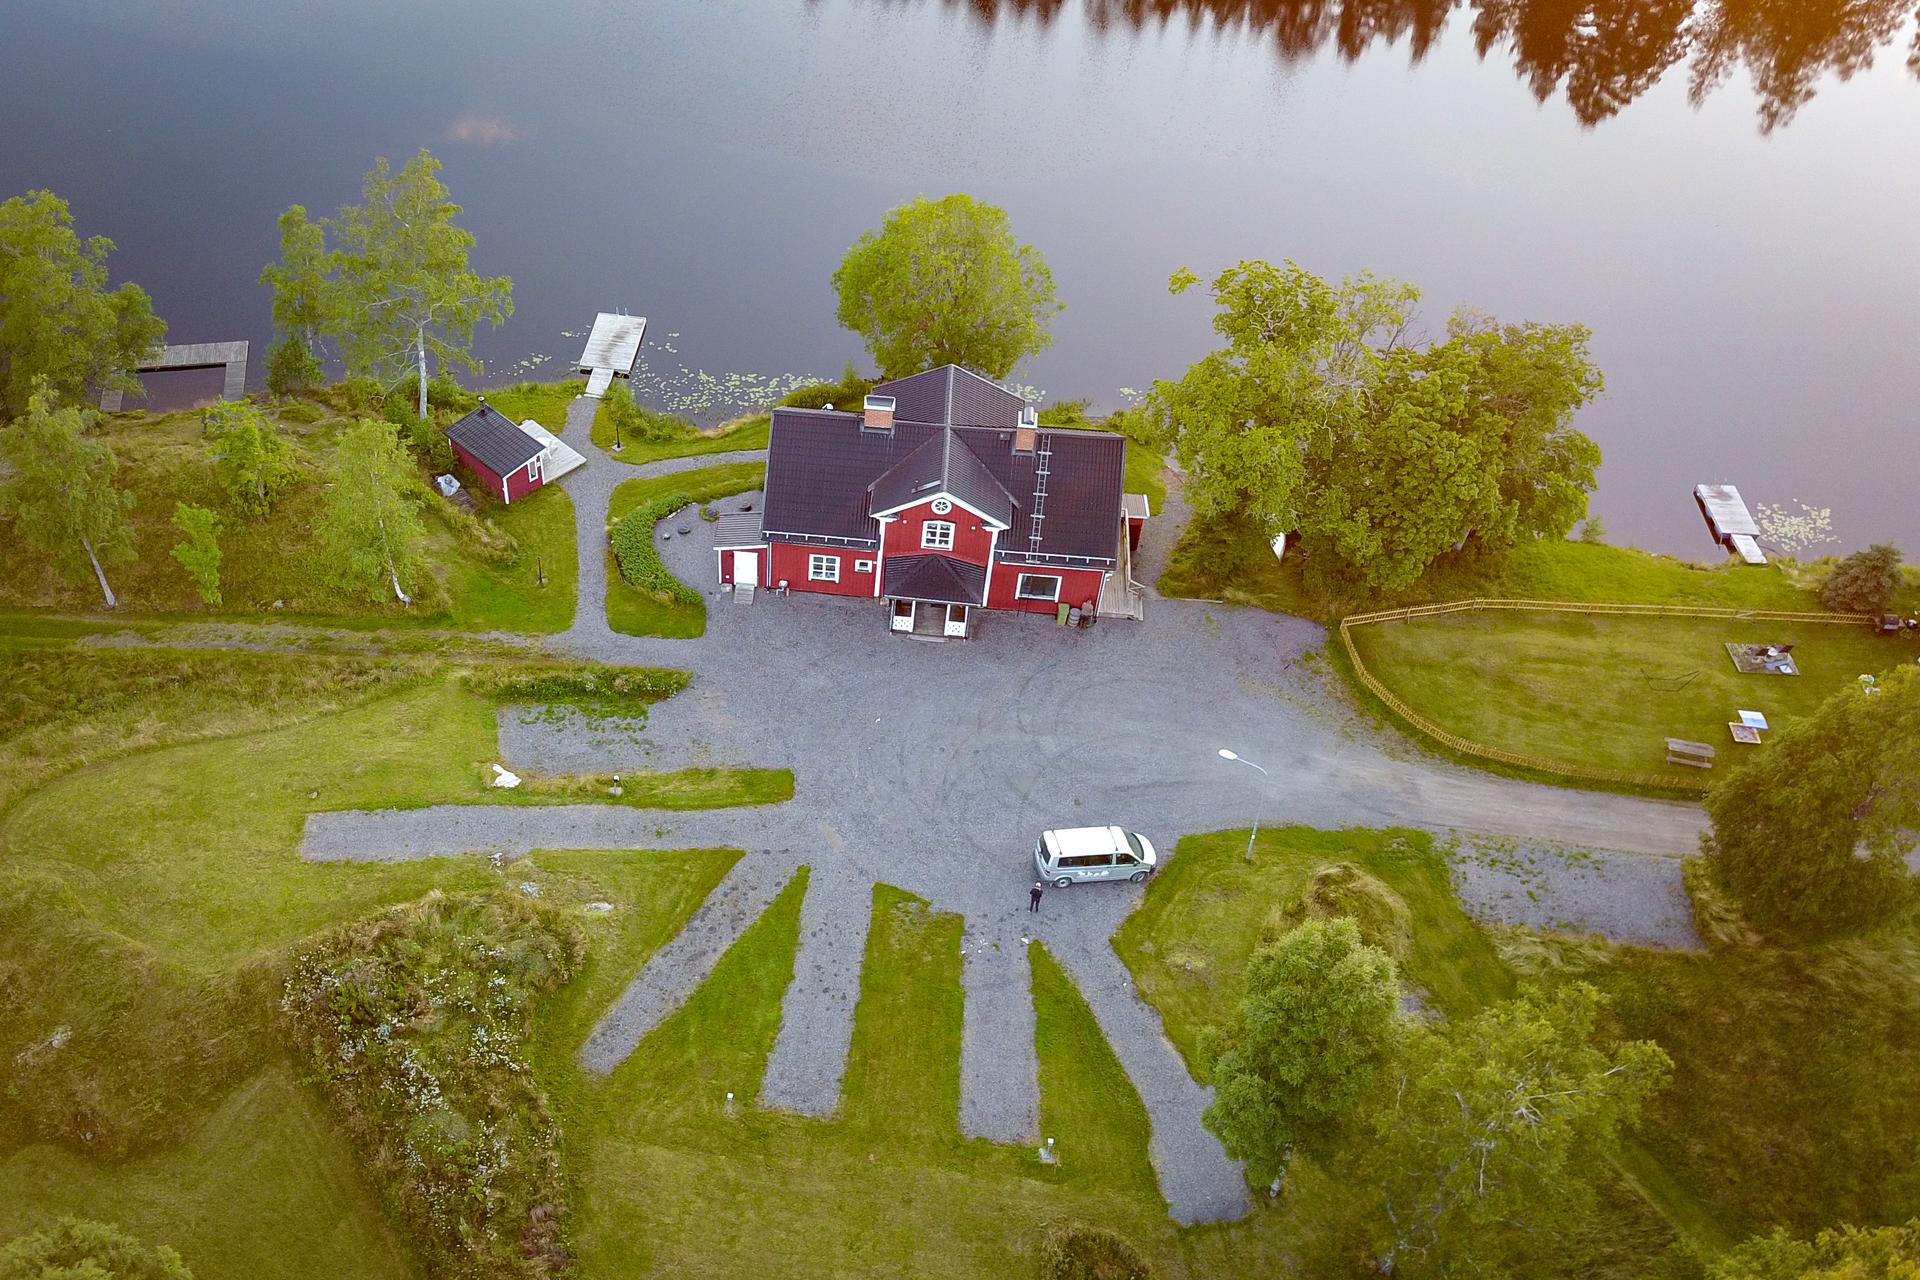 A bird's-eye view of the river lodge with sauna, swimming area, deck, and large veranda.